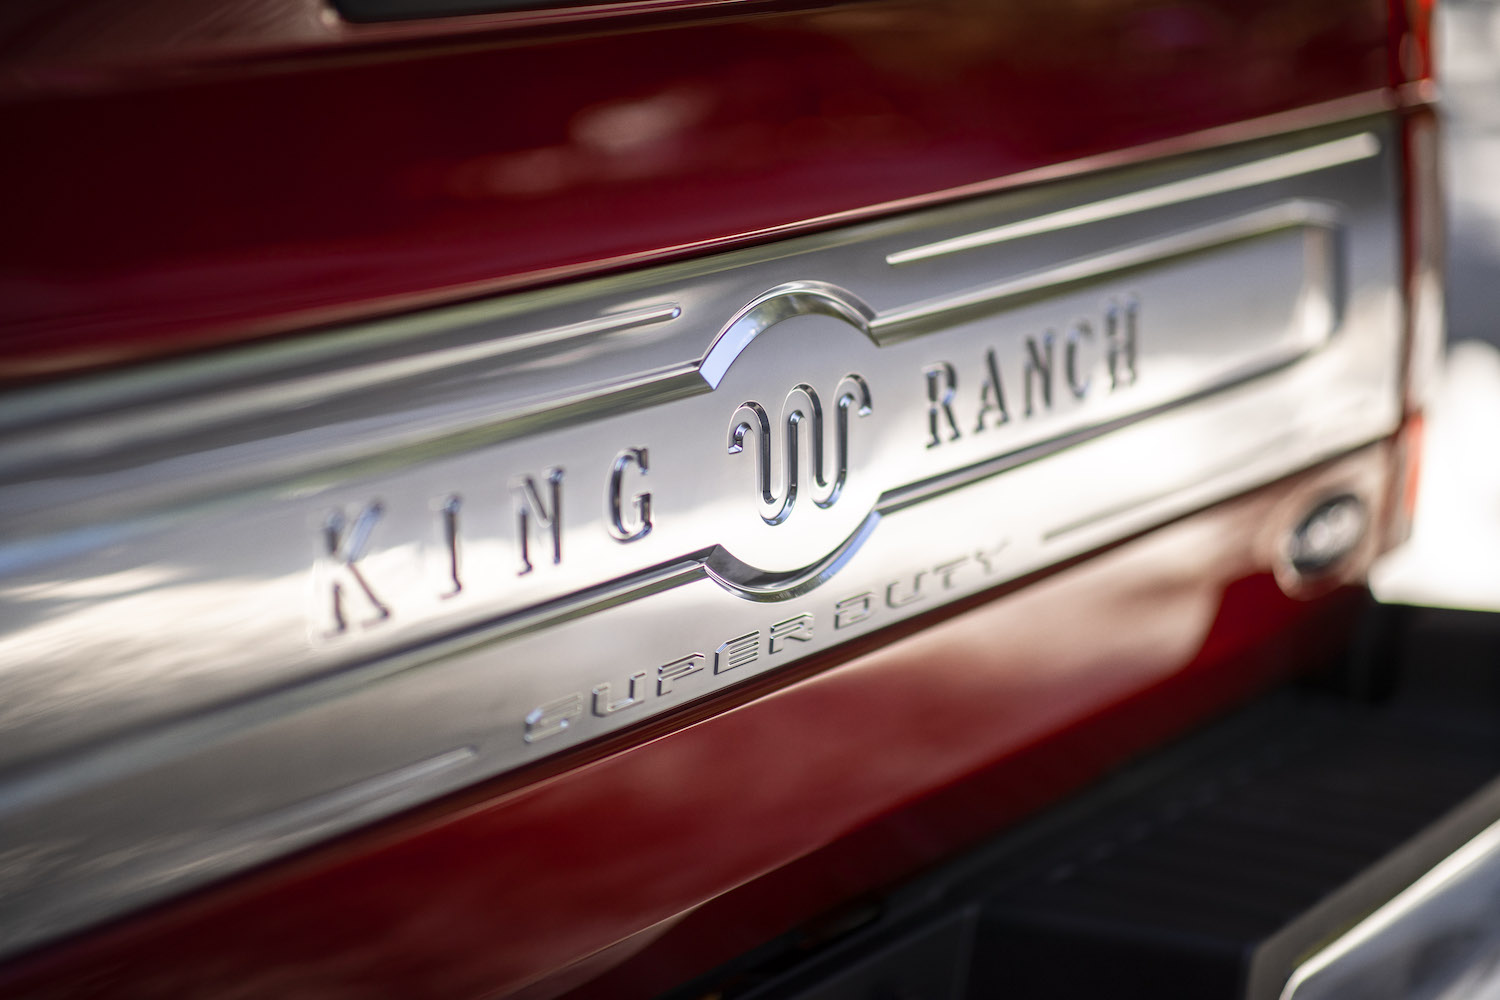 The King Ranch logo and name on the red tailgate of a top-trim Super Duty F-250 truck.